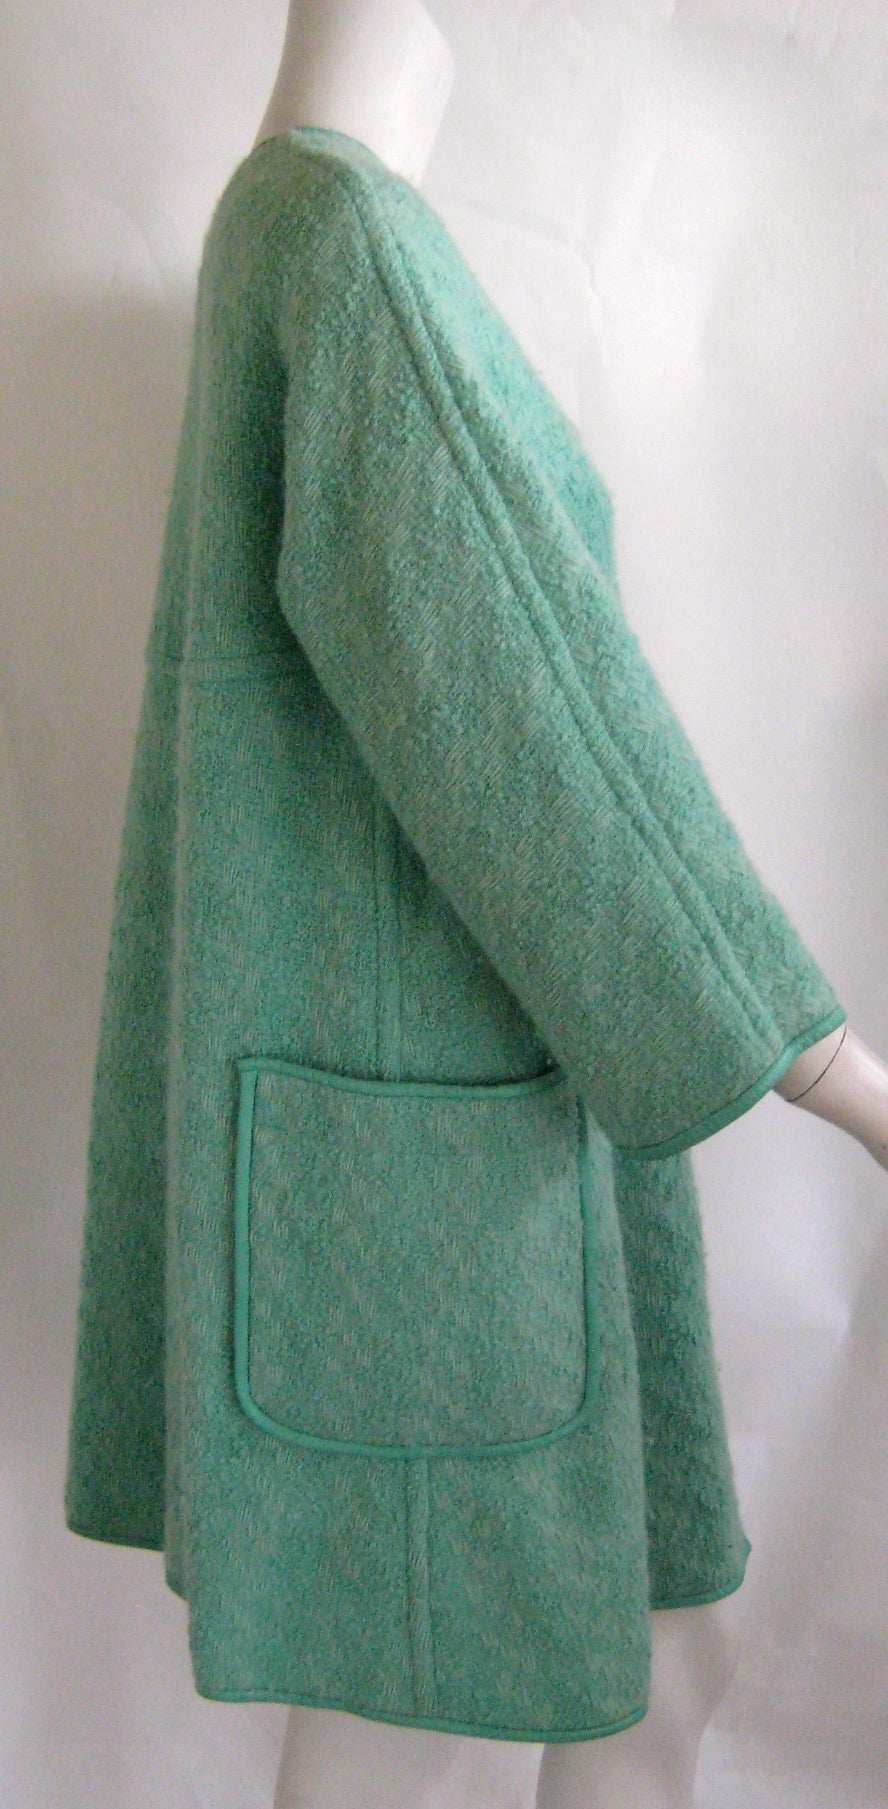 Wonderful vintage Bonnie Cashin coat in a rare and hard to find color .This is made of an aqua boucle wool trimmed in matching leather .It has two large square side pockets that are trimmed in aqua leather and her signature turnlock closures down